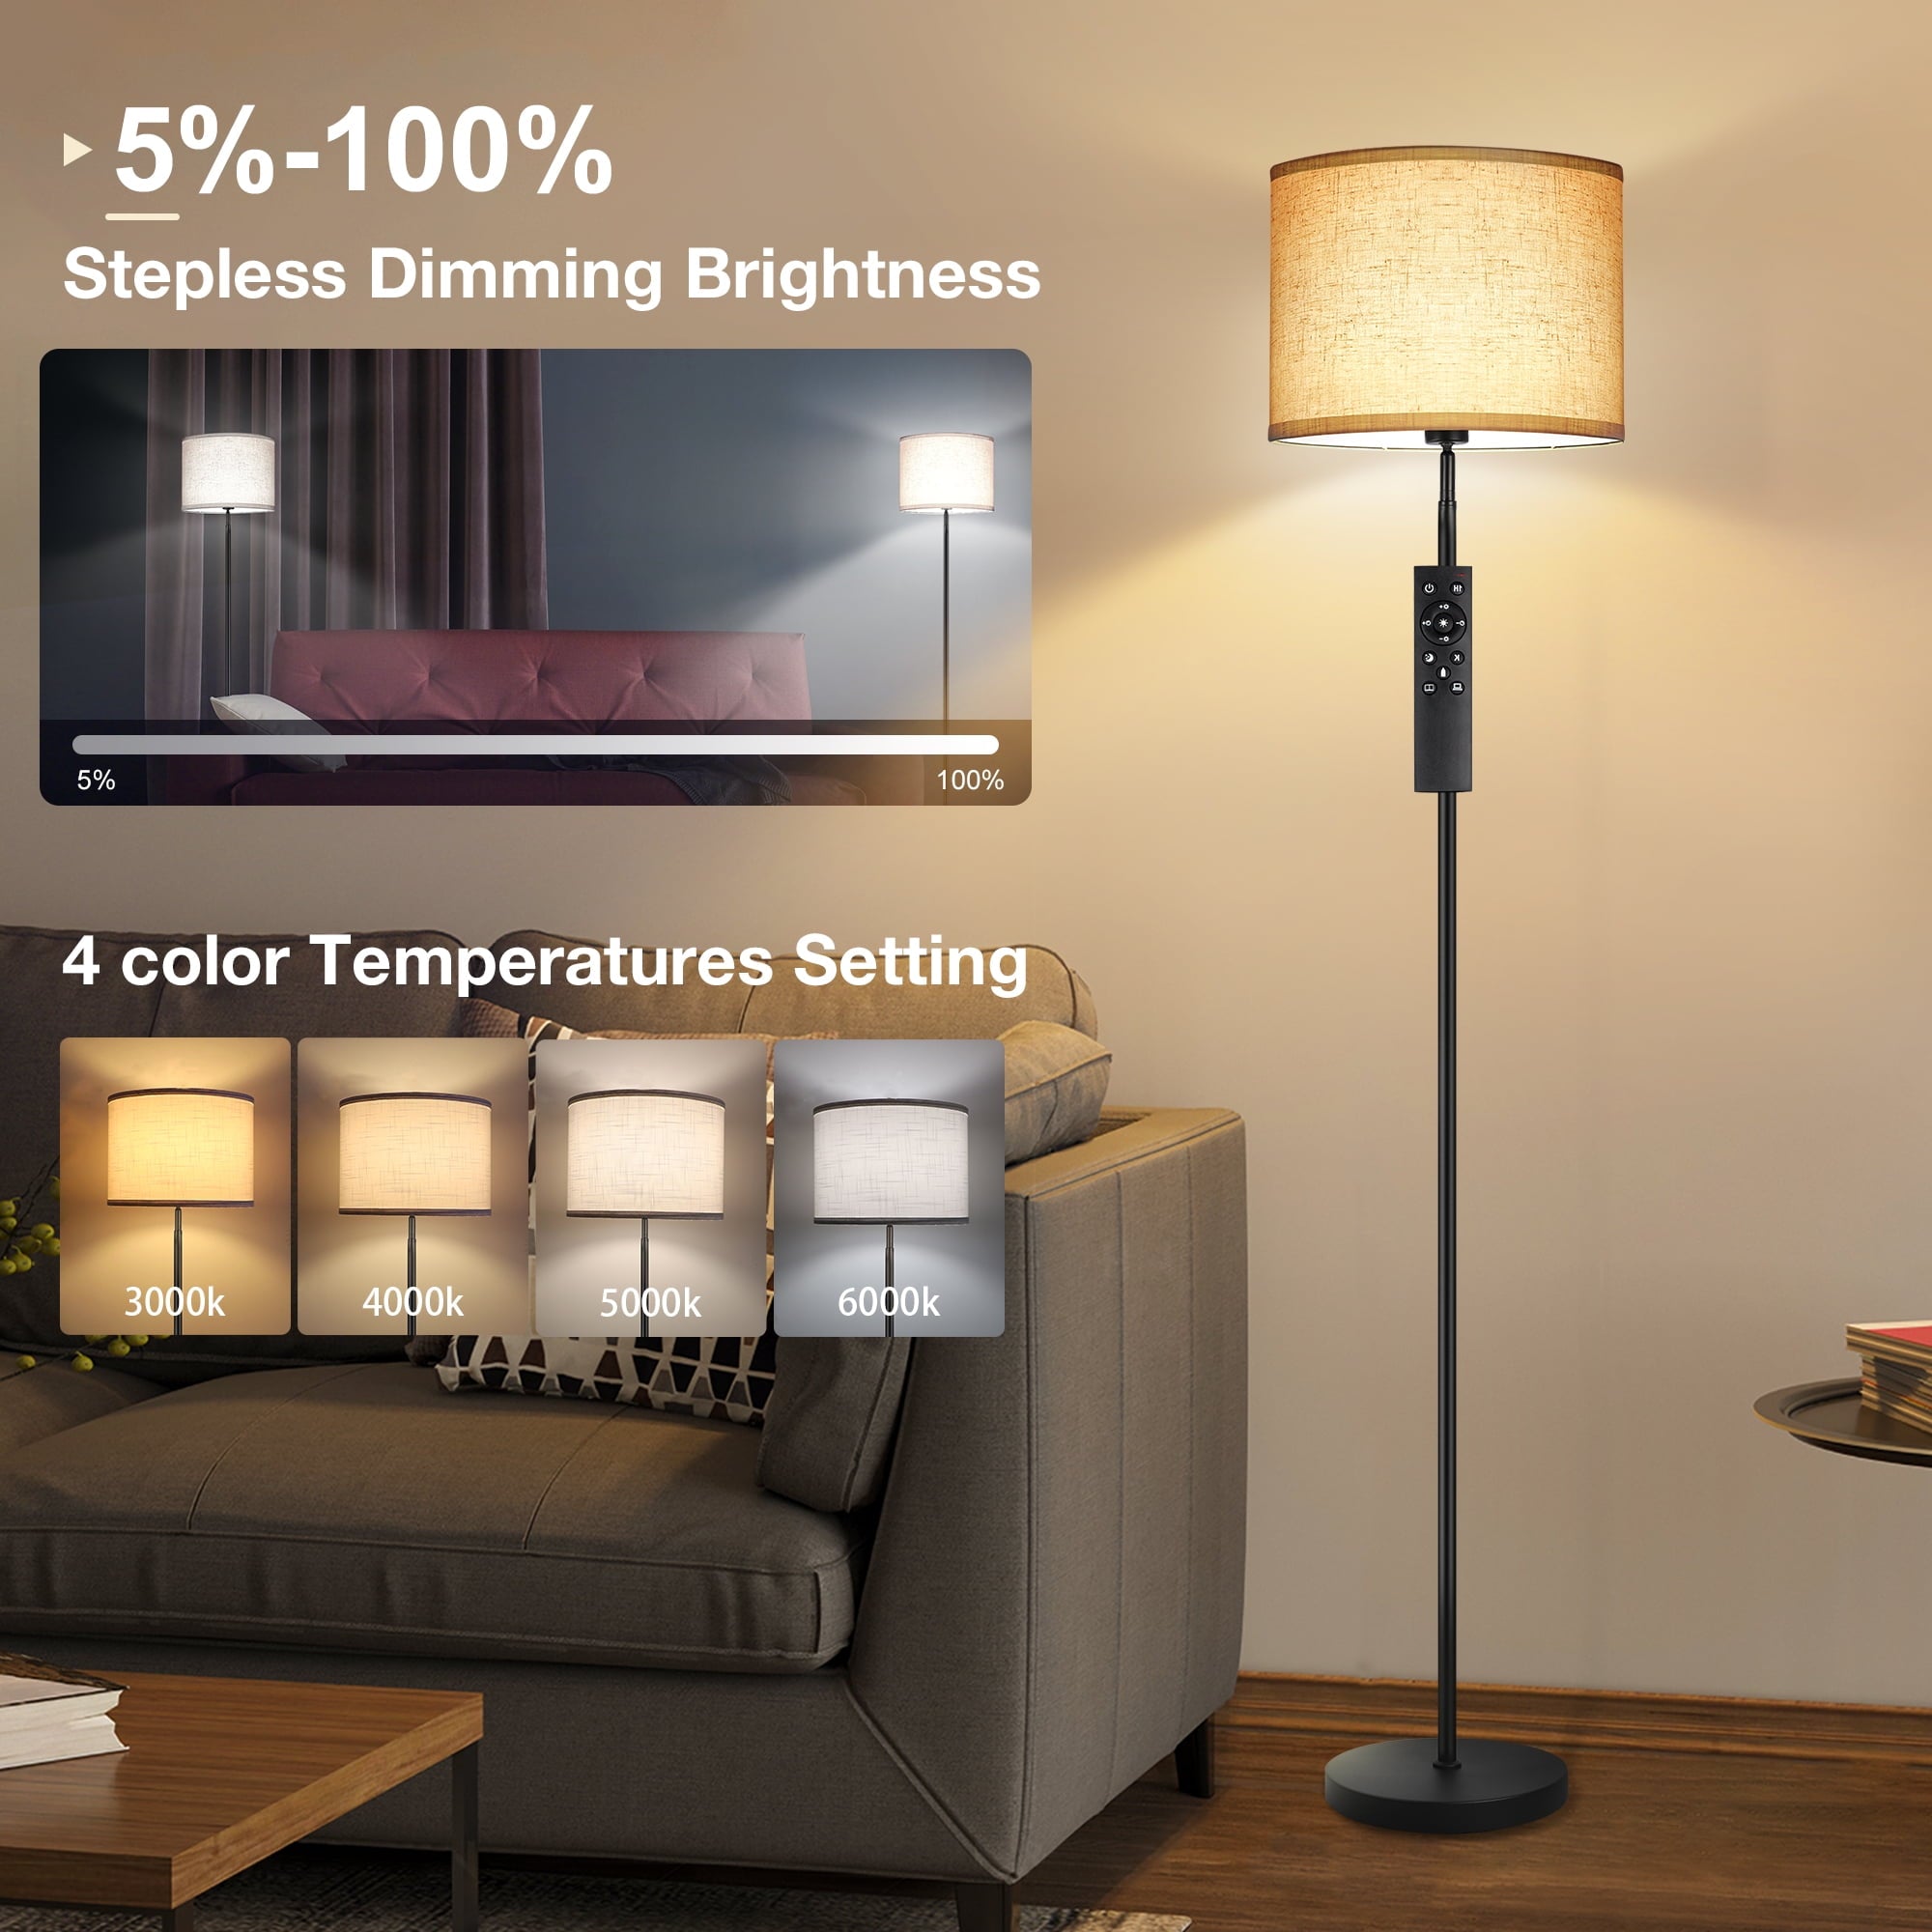 OUTON Floor Lamps for Living Room with Remote Control, 4 Color Temperatures Pole Lamps with Linen Shade for Bedroom, Office